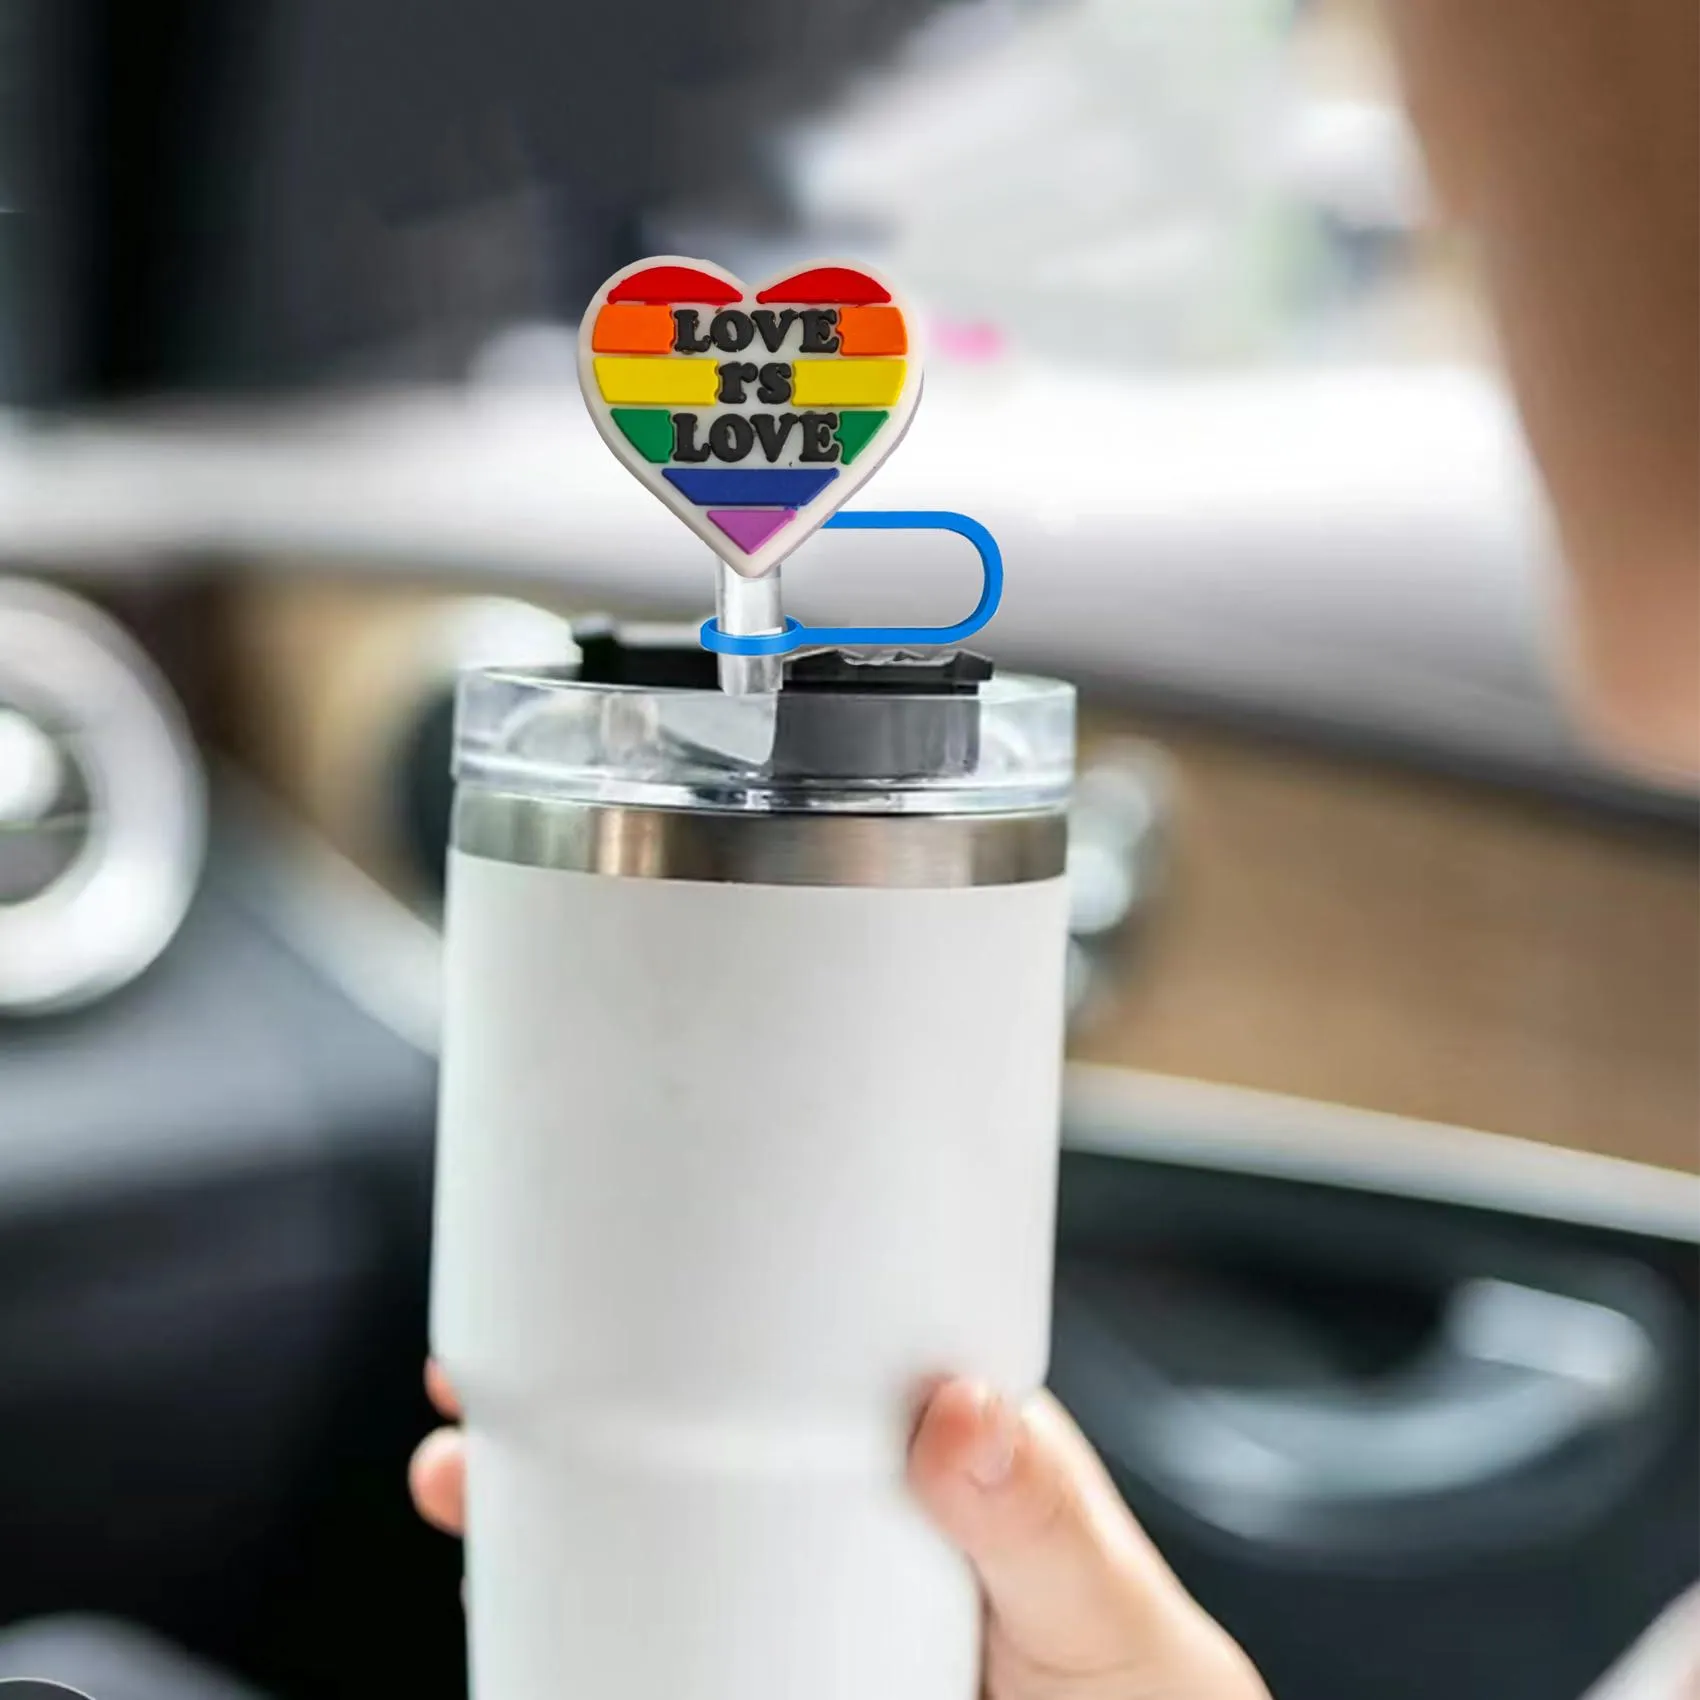 rainbow 24 straw cover for  cups dust-proof reusable topper cup accessories shape covers drinking tip fit tips protectors